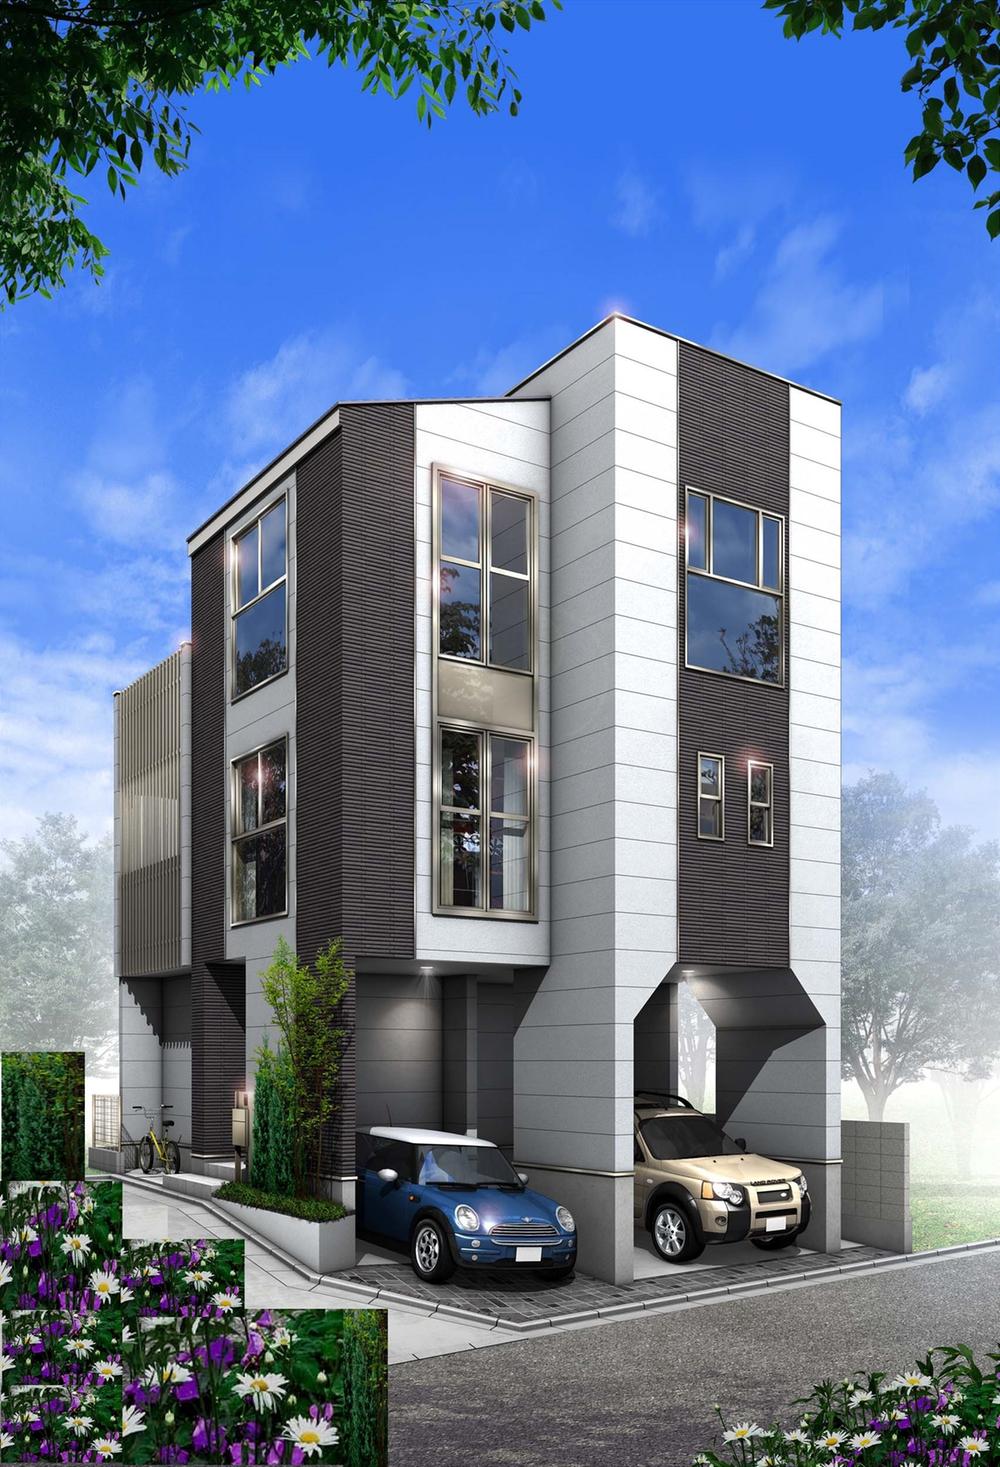 Building plan example (Perth ・ appearance). Stylish urban three-story house